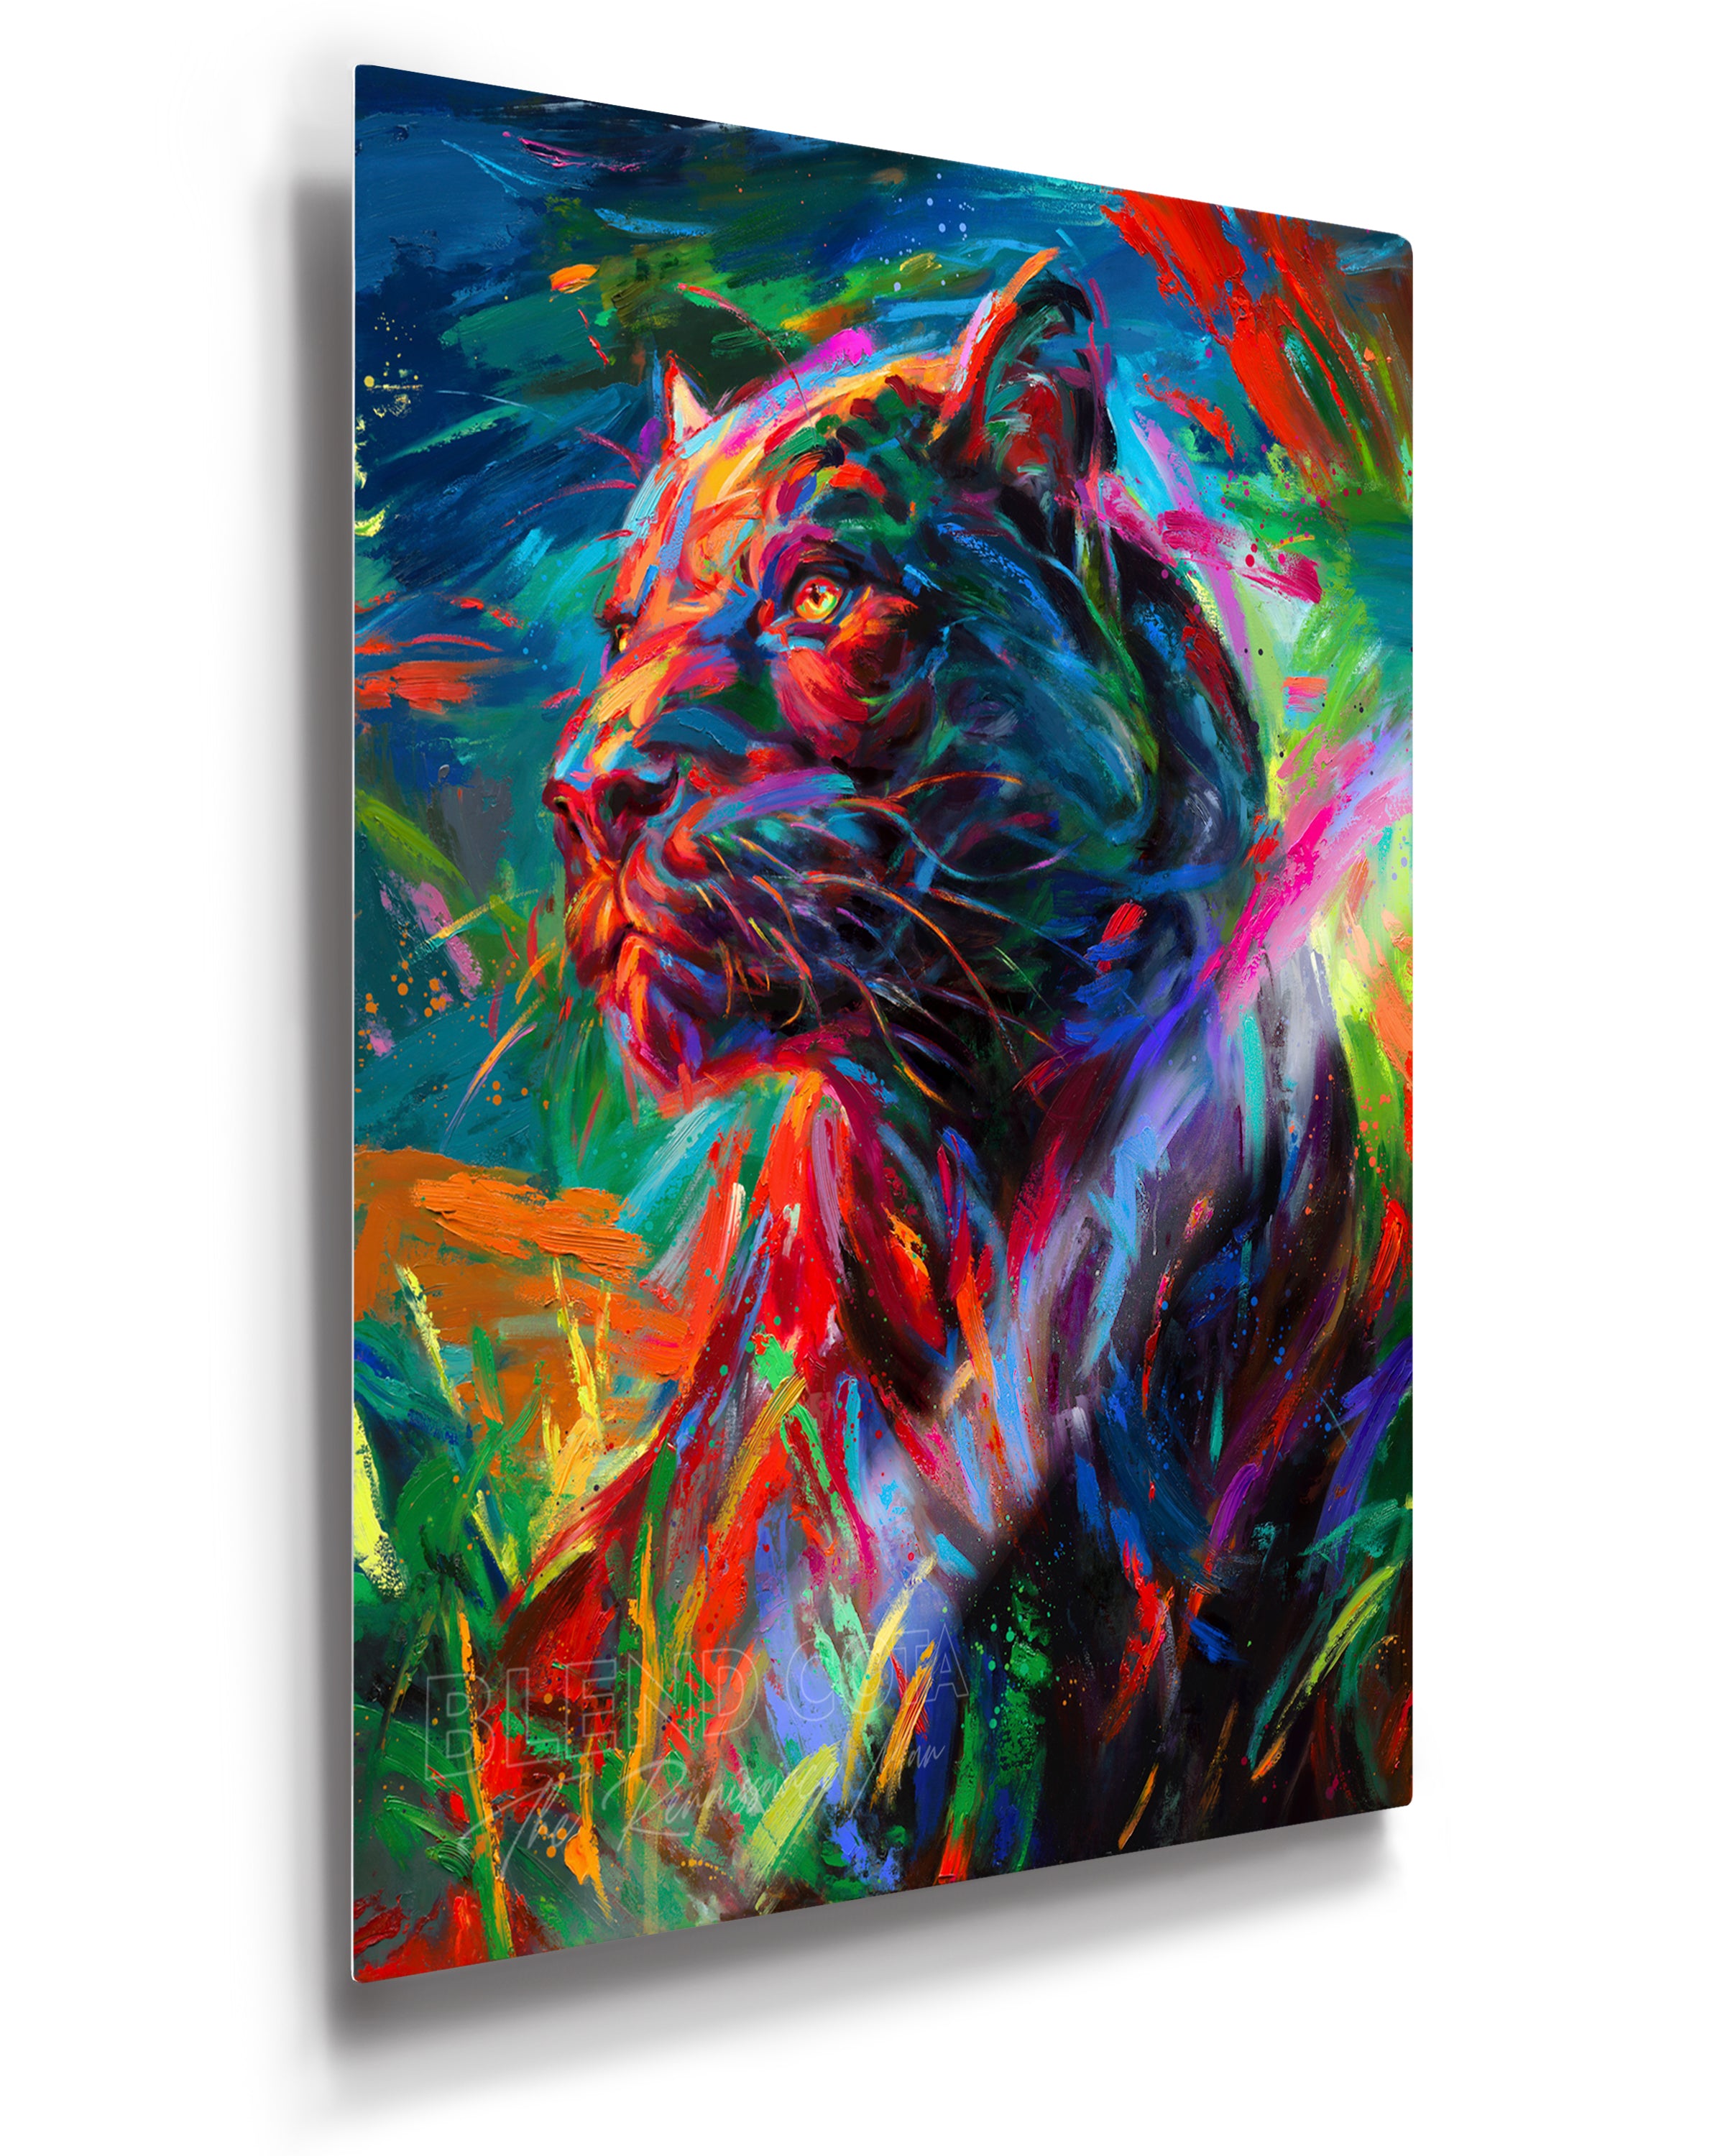 Limited Edition glossy metal print of the black panther stalking its prey through the long night painted with colorful brushstrokes in an expressionistic style.